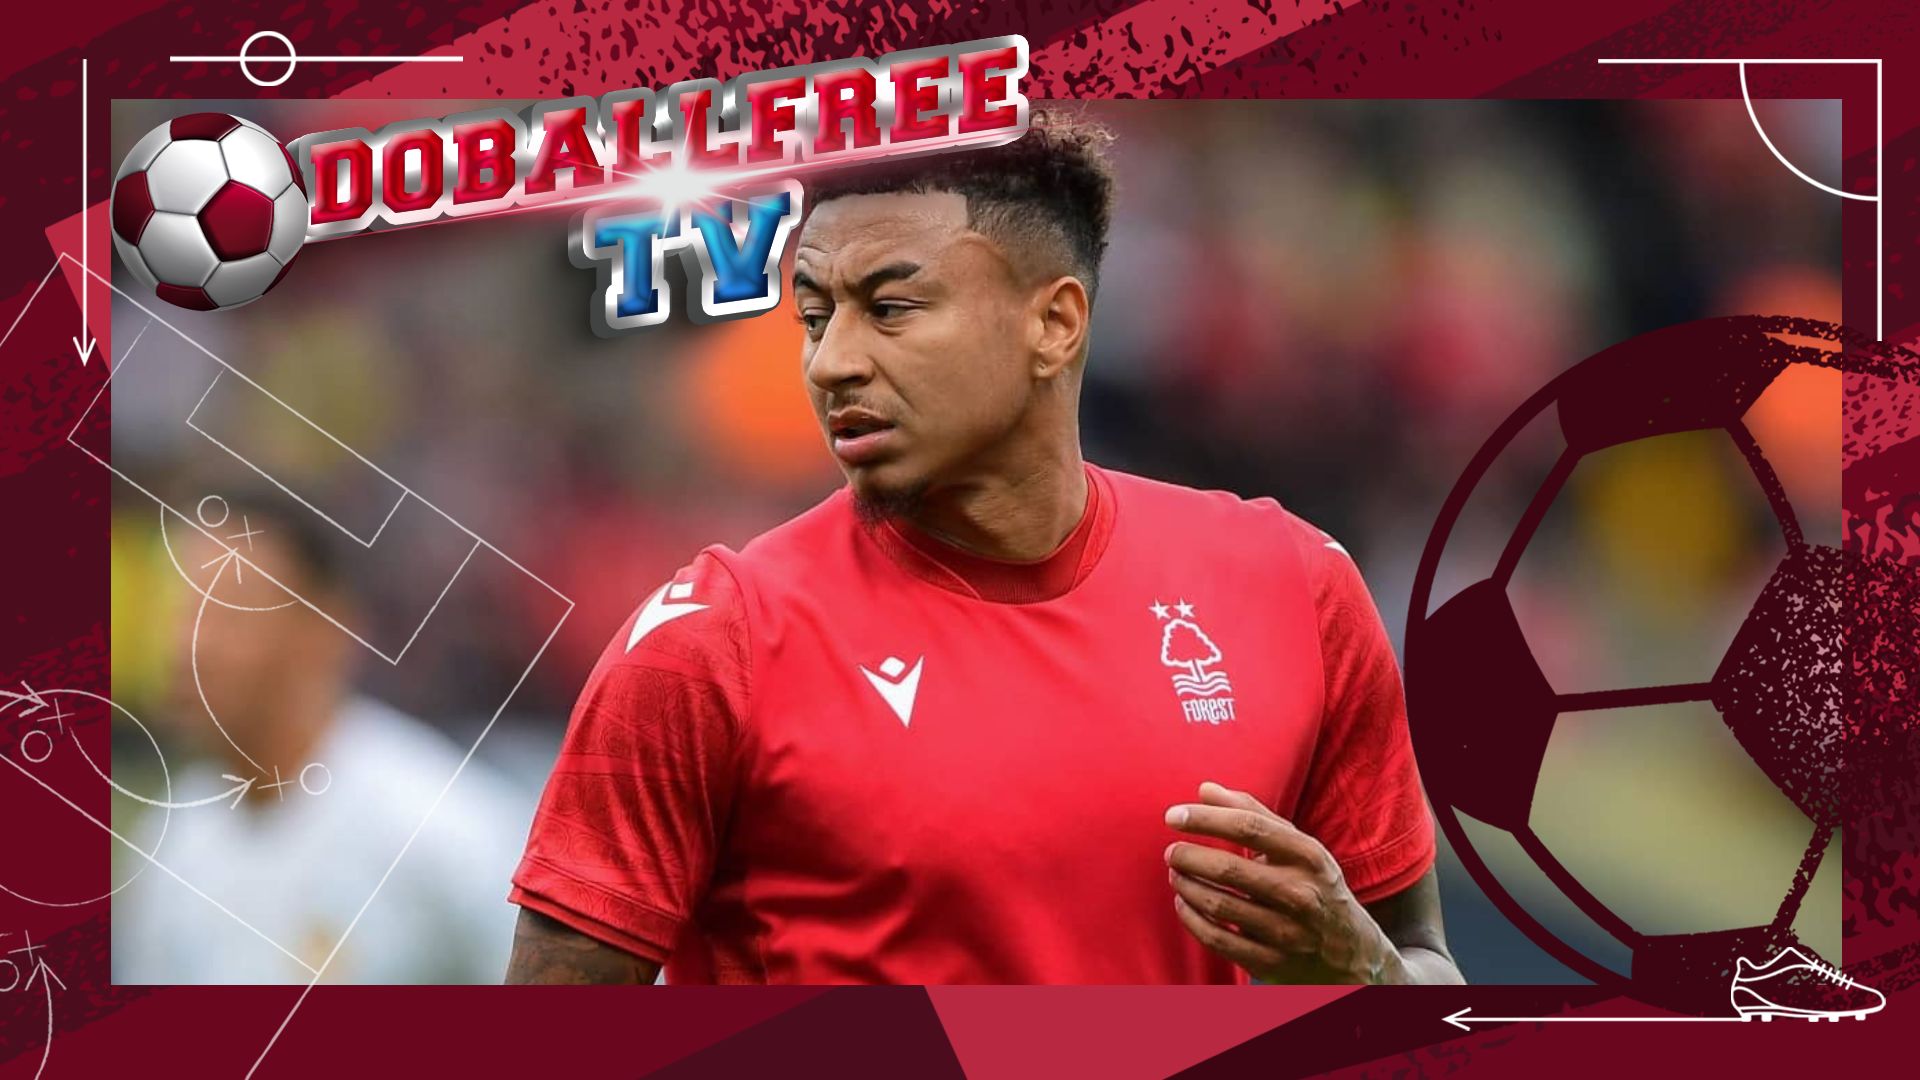 Lingard offers himself to join Barcelona